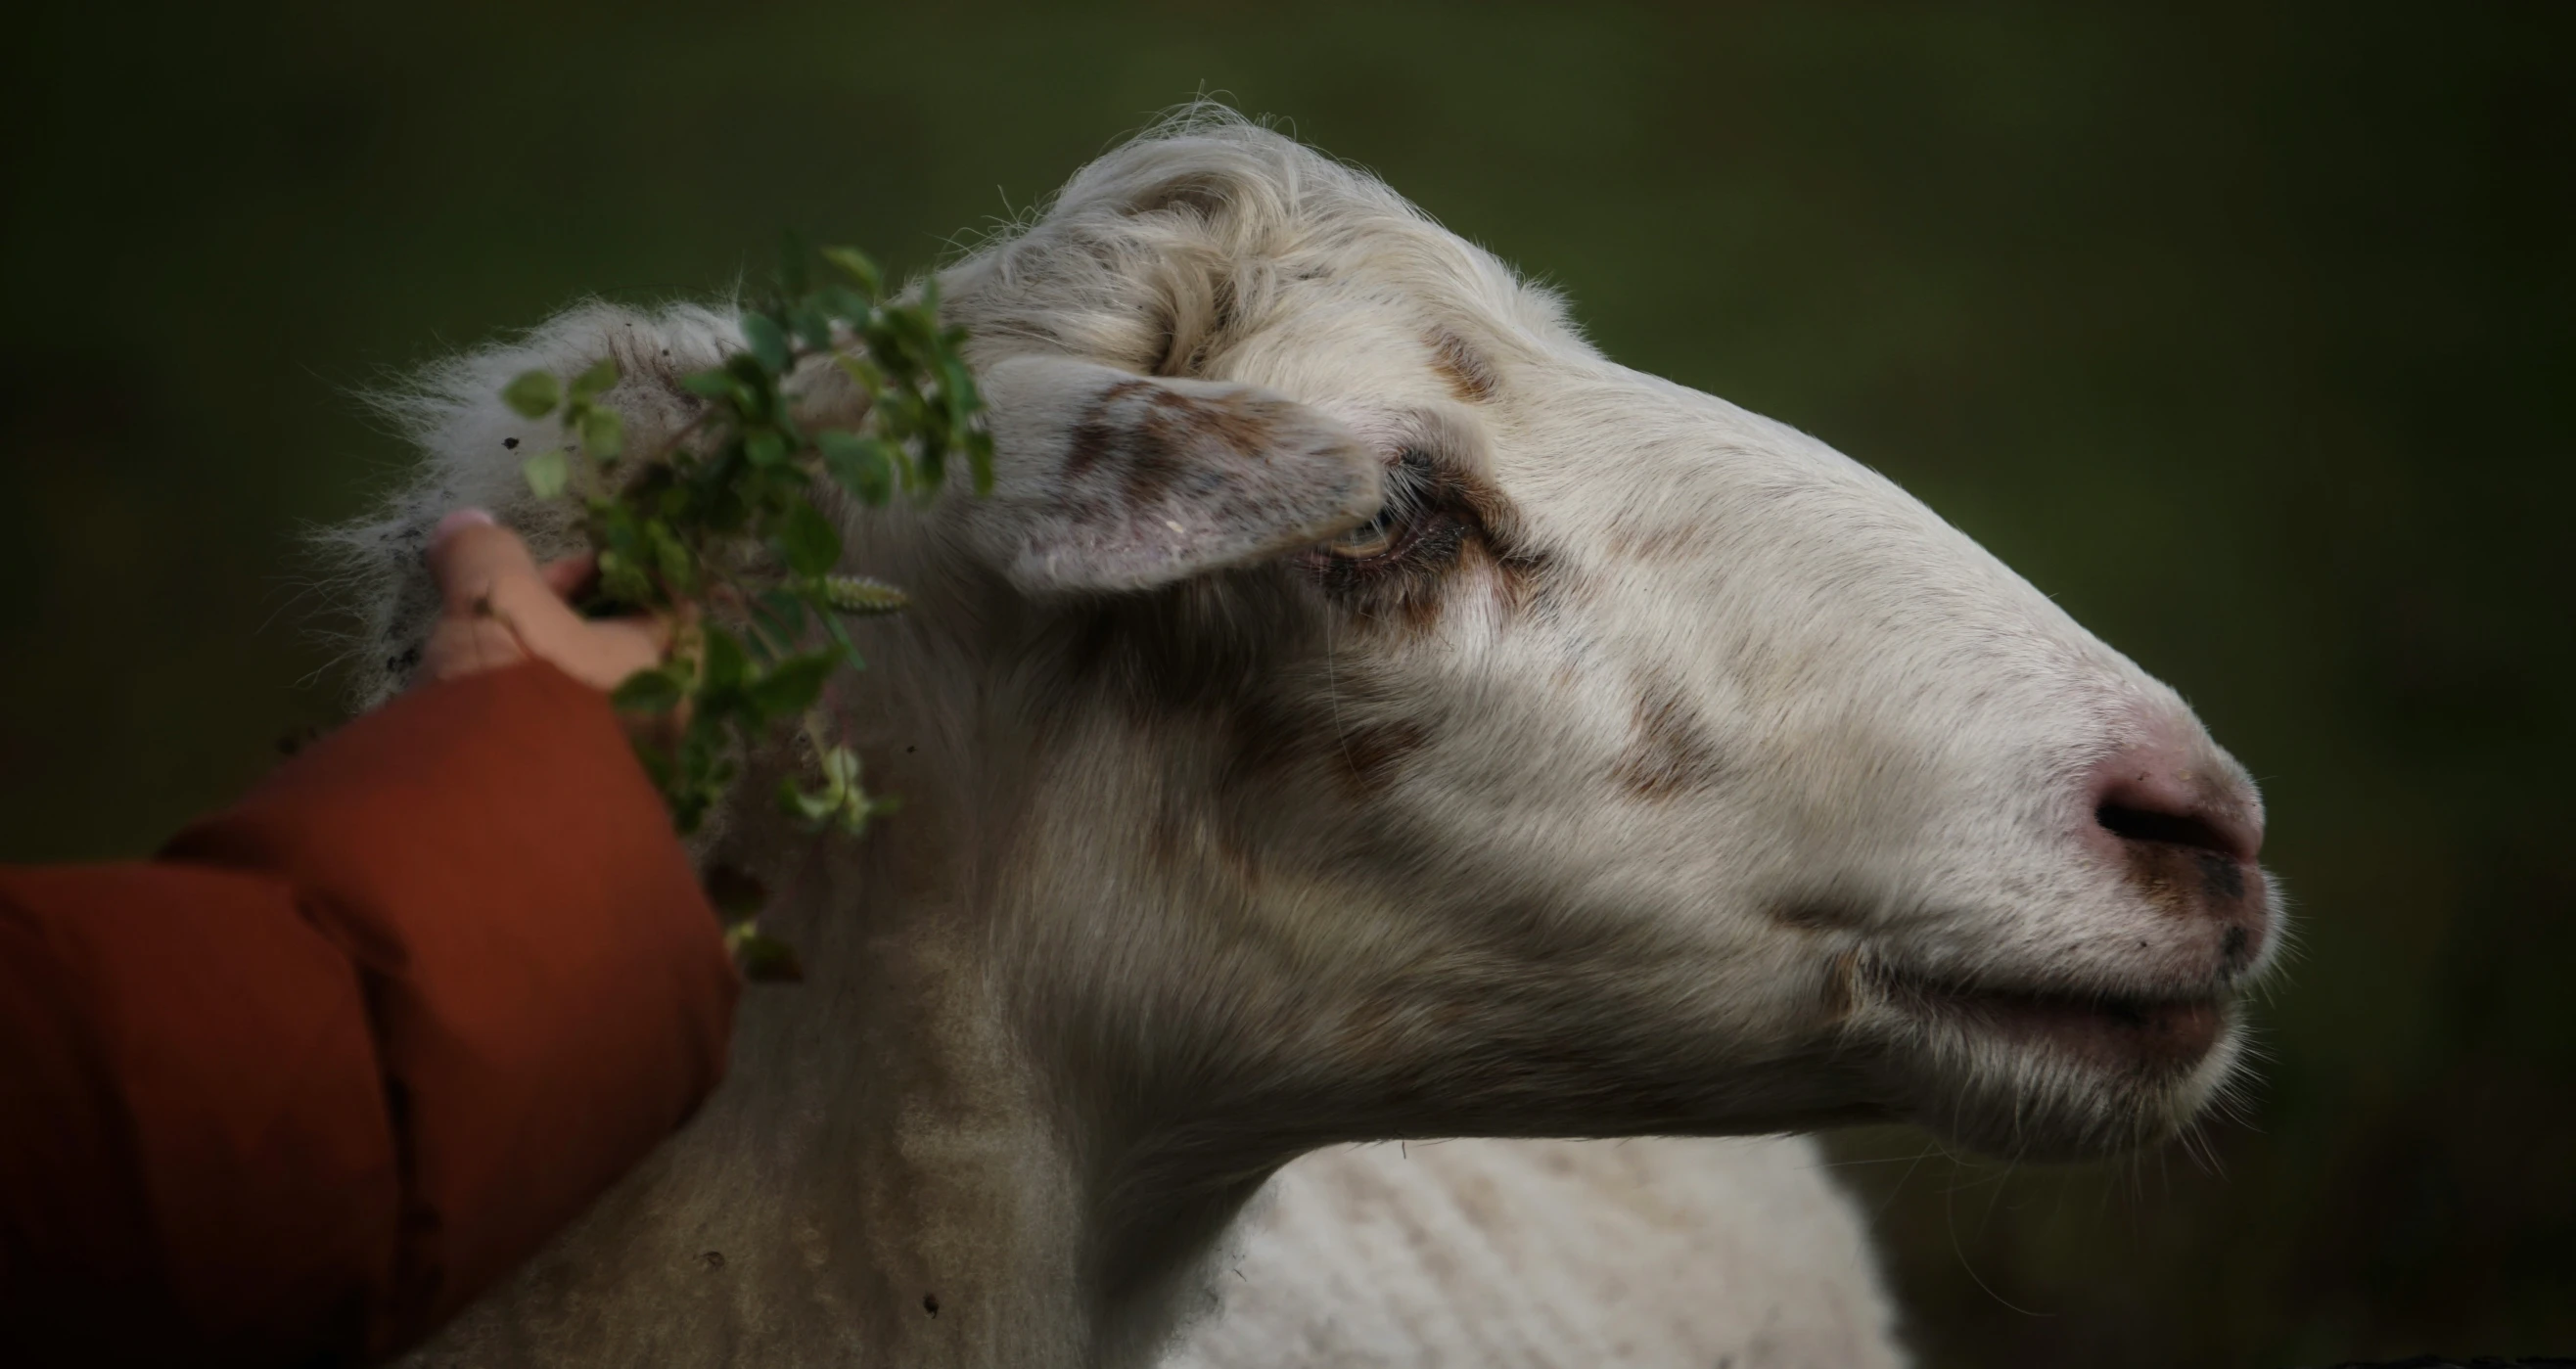 a sheep with some leaves on its head